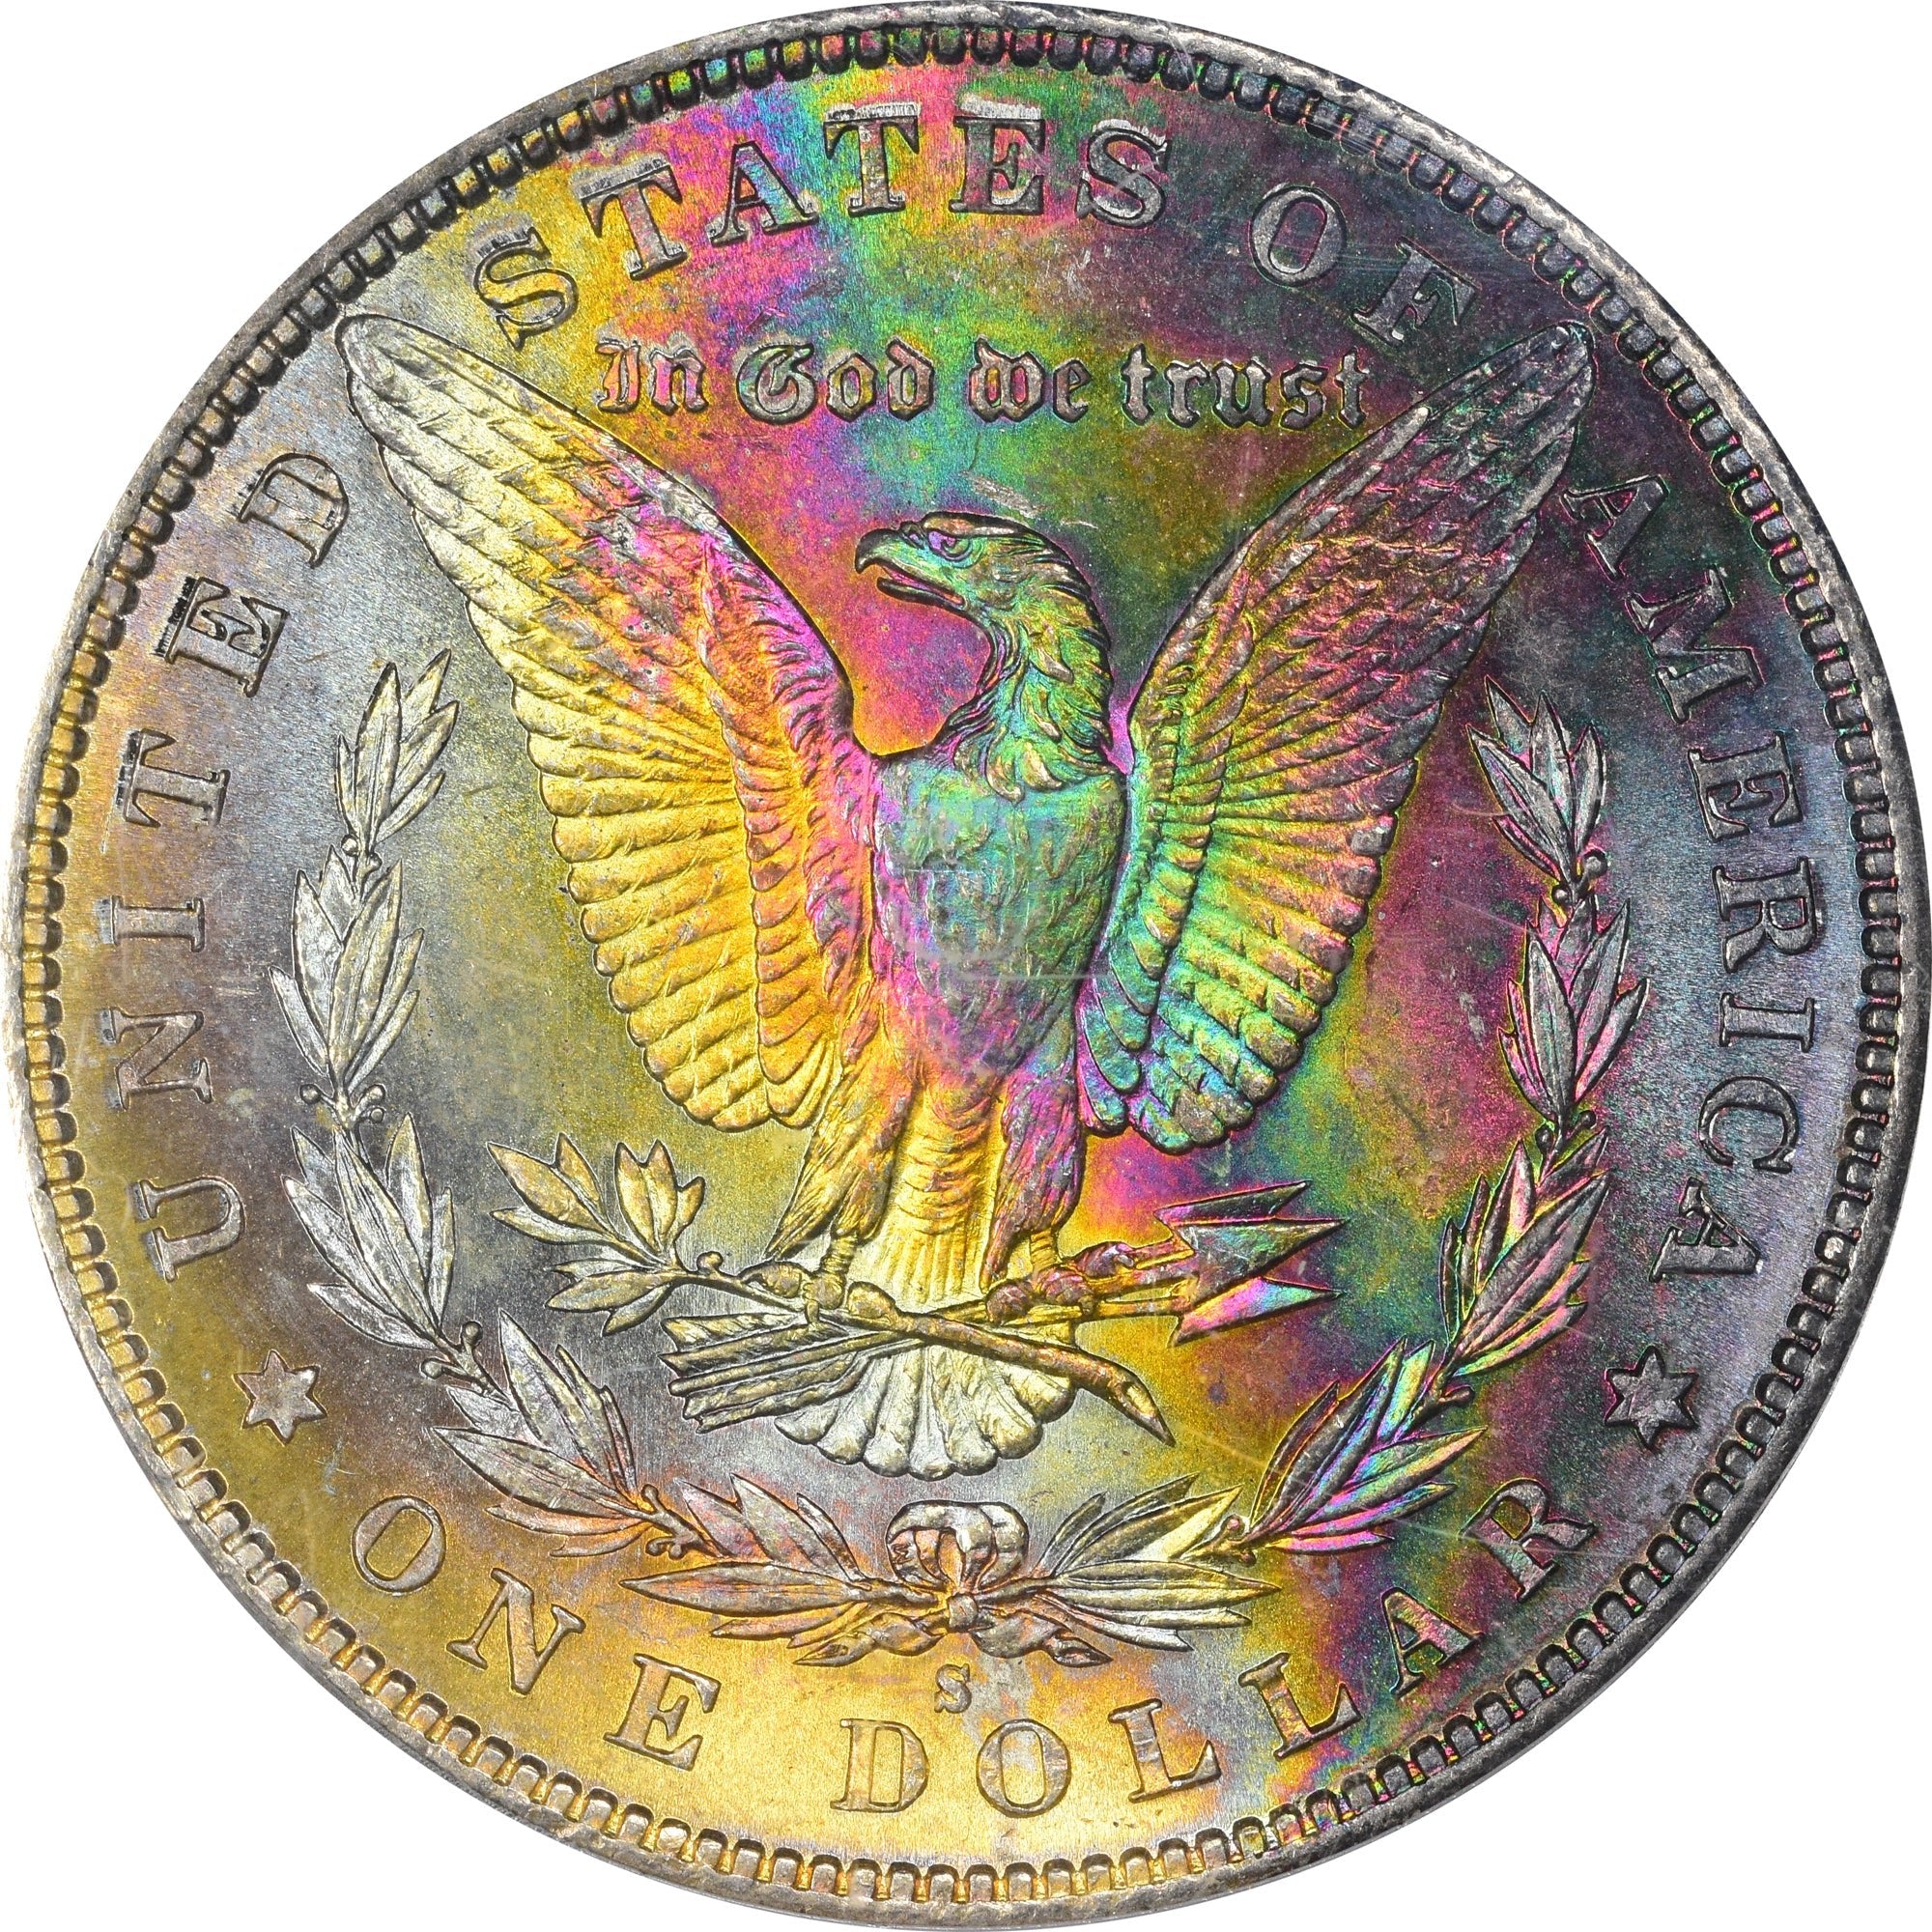 1882-S $1 MS64 OGH PCGS - Paradime Coins US Coins For Sale